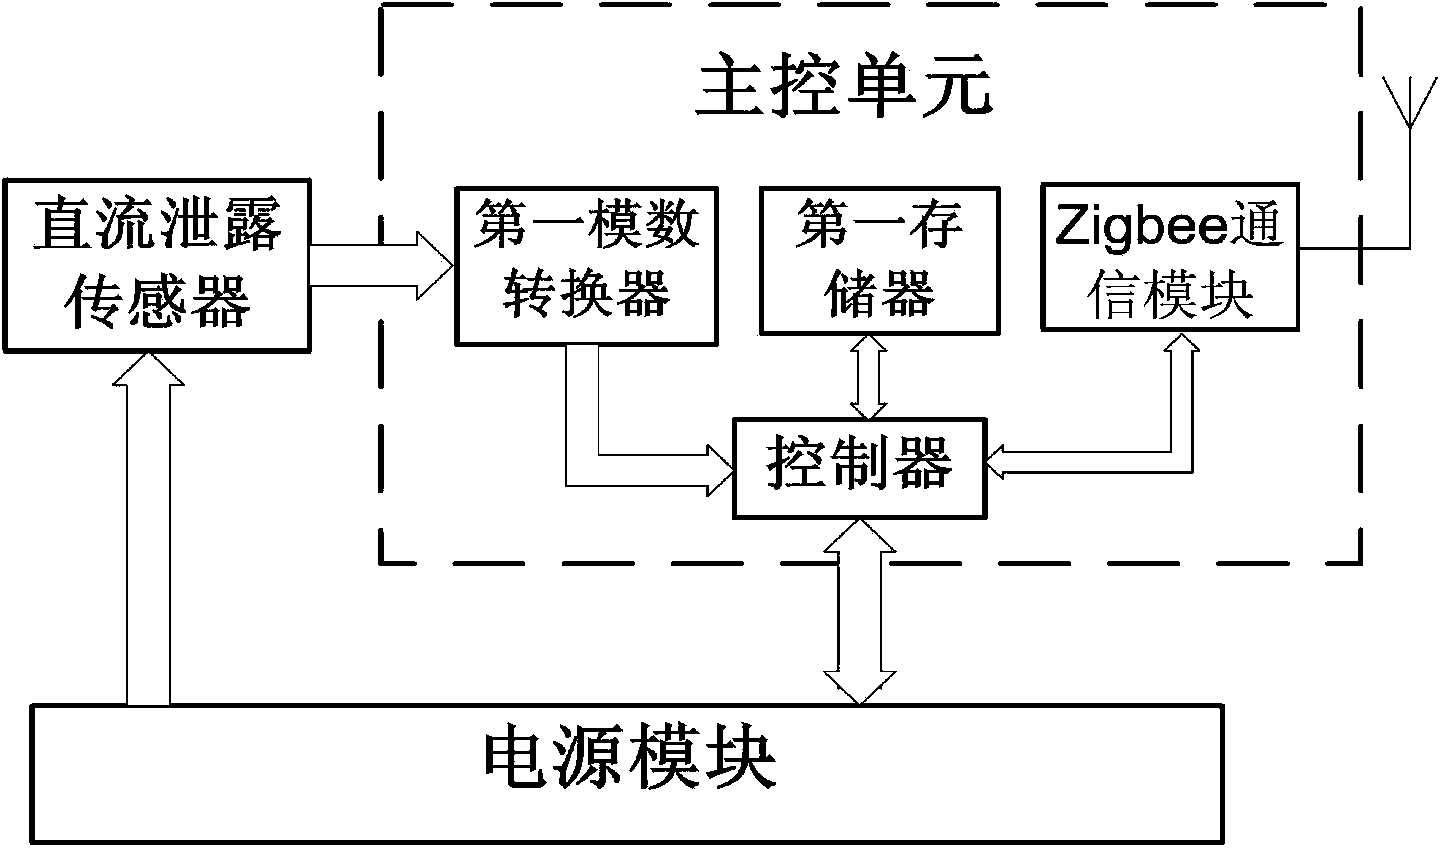 Online monitoring system and method for insulation state of substation DC system